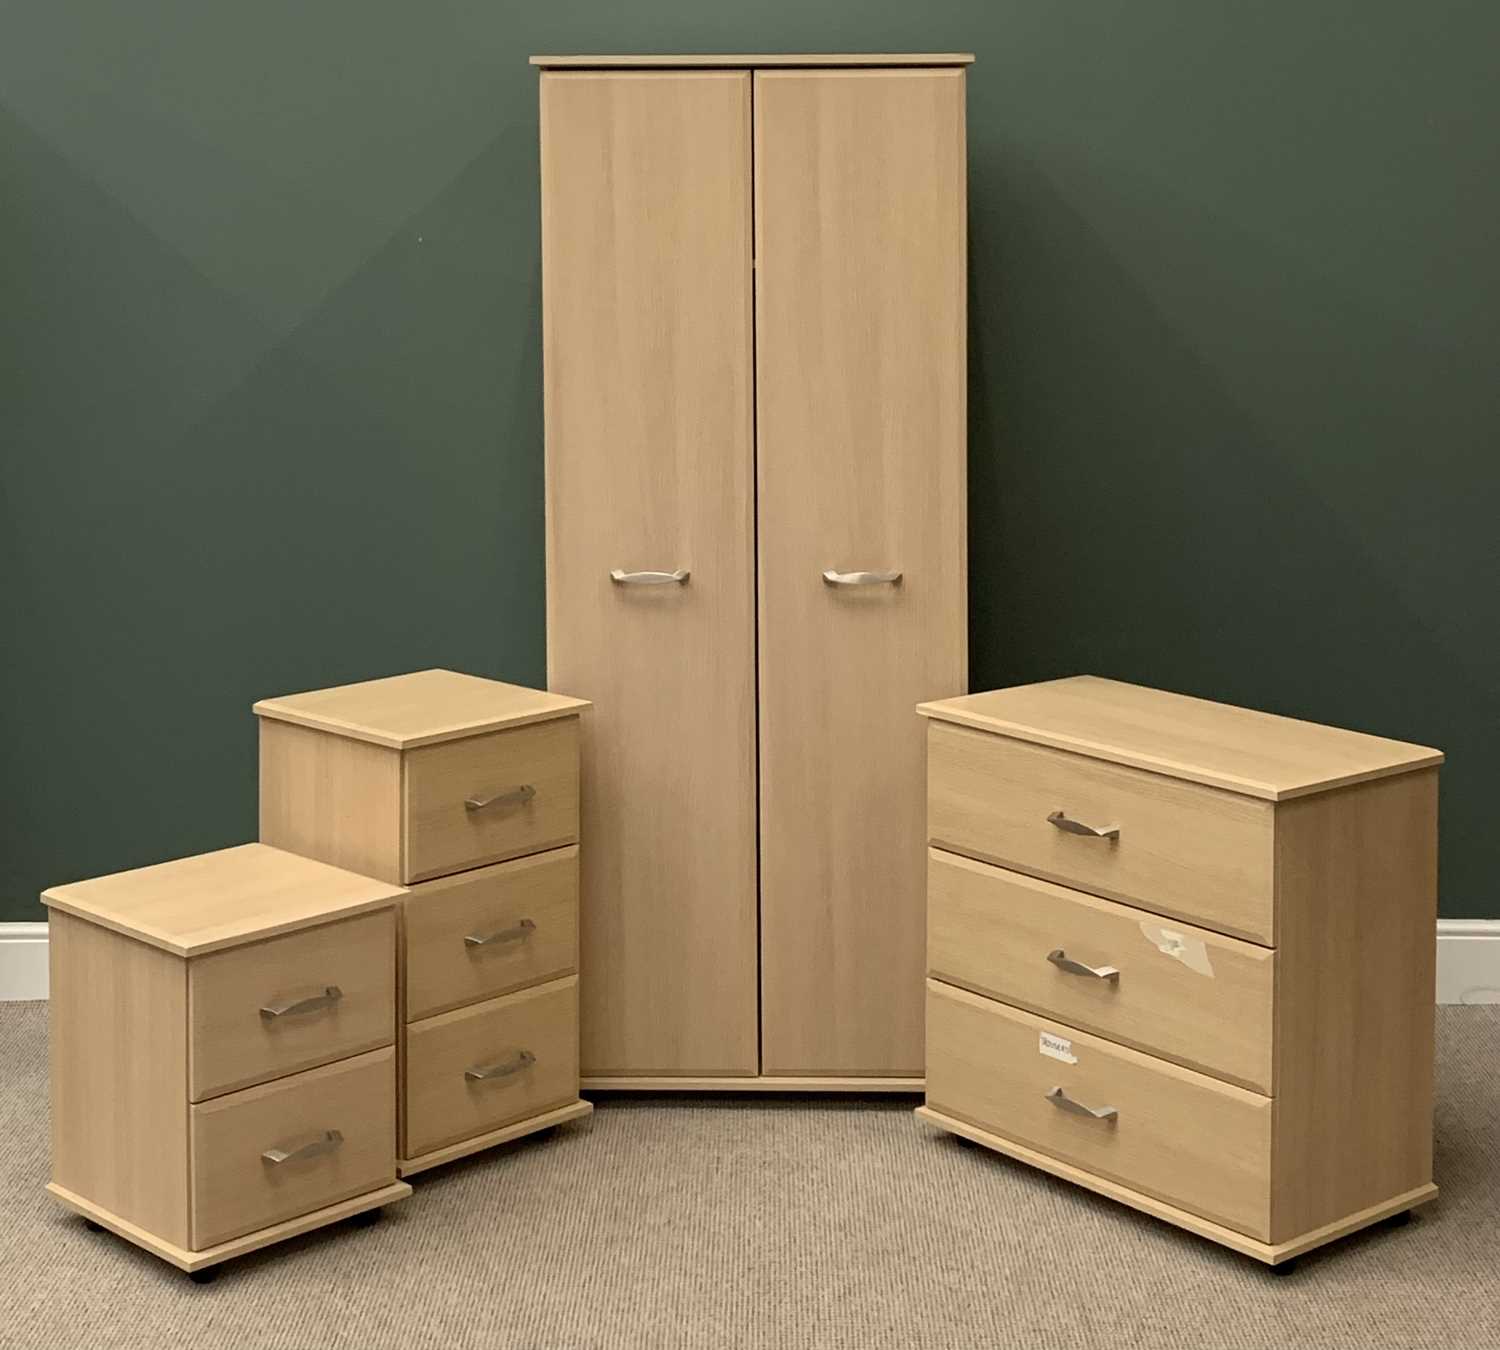 MODERN LIGHT WOOD BEDROOM FURNITURE - two door wardrobe, 189cms H, 78cms W, 56cms D and three